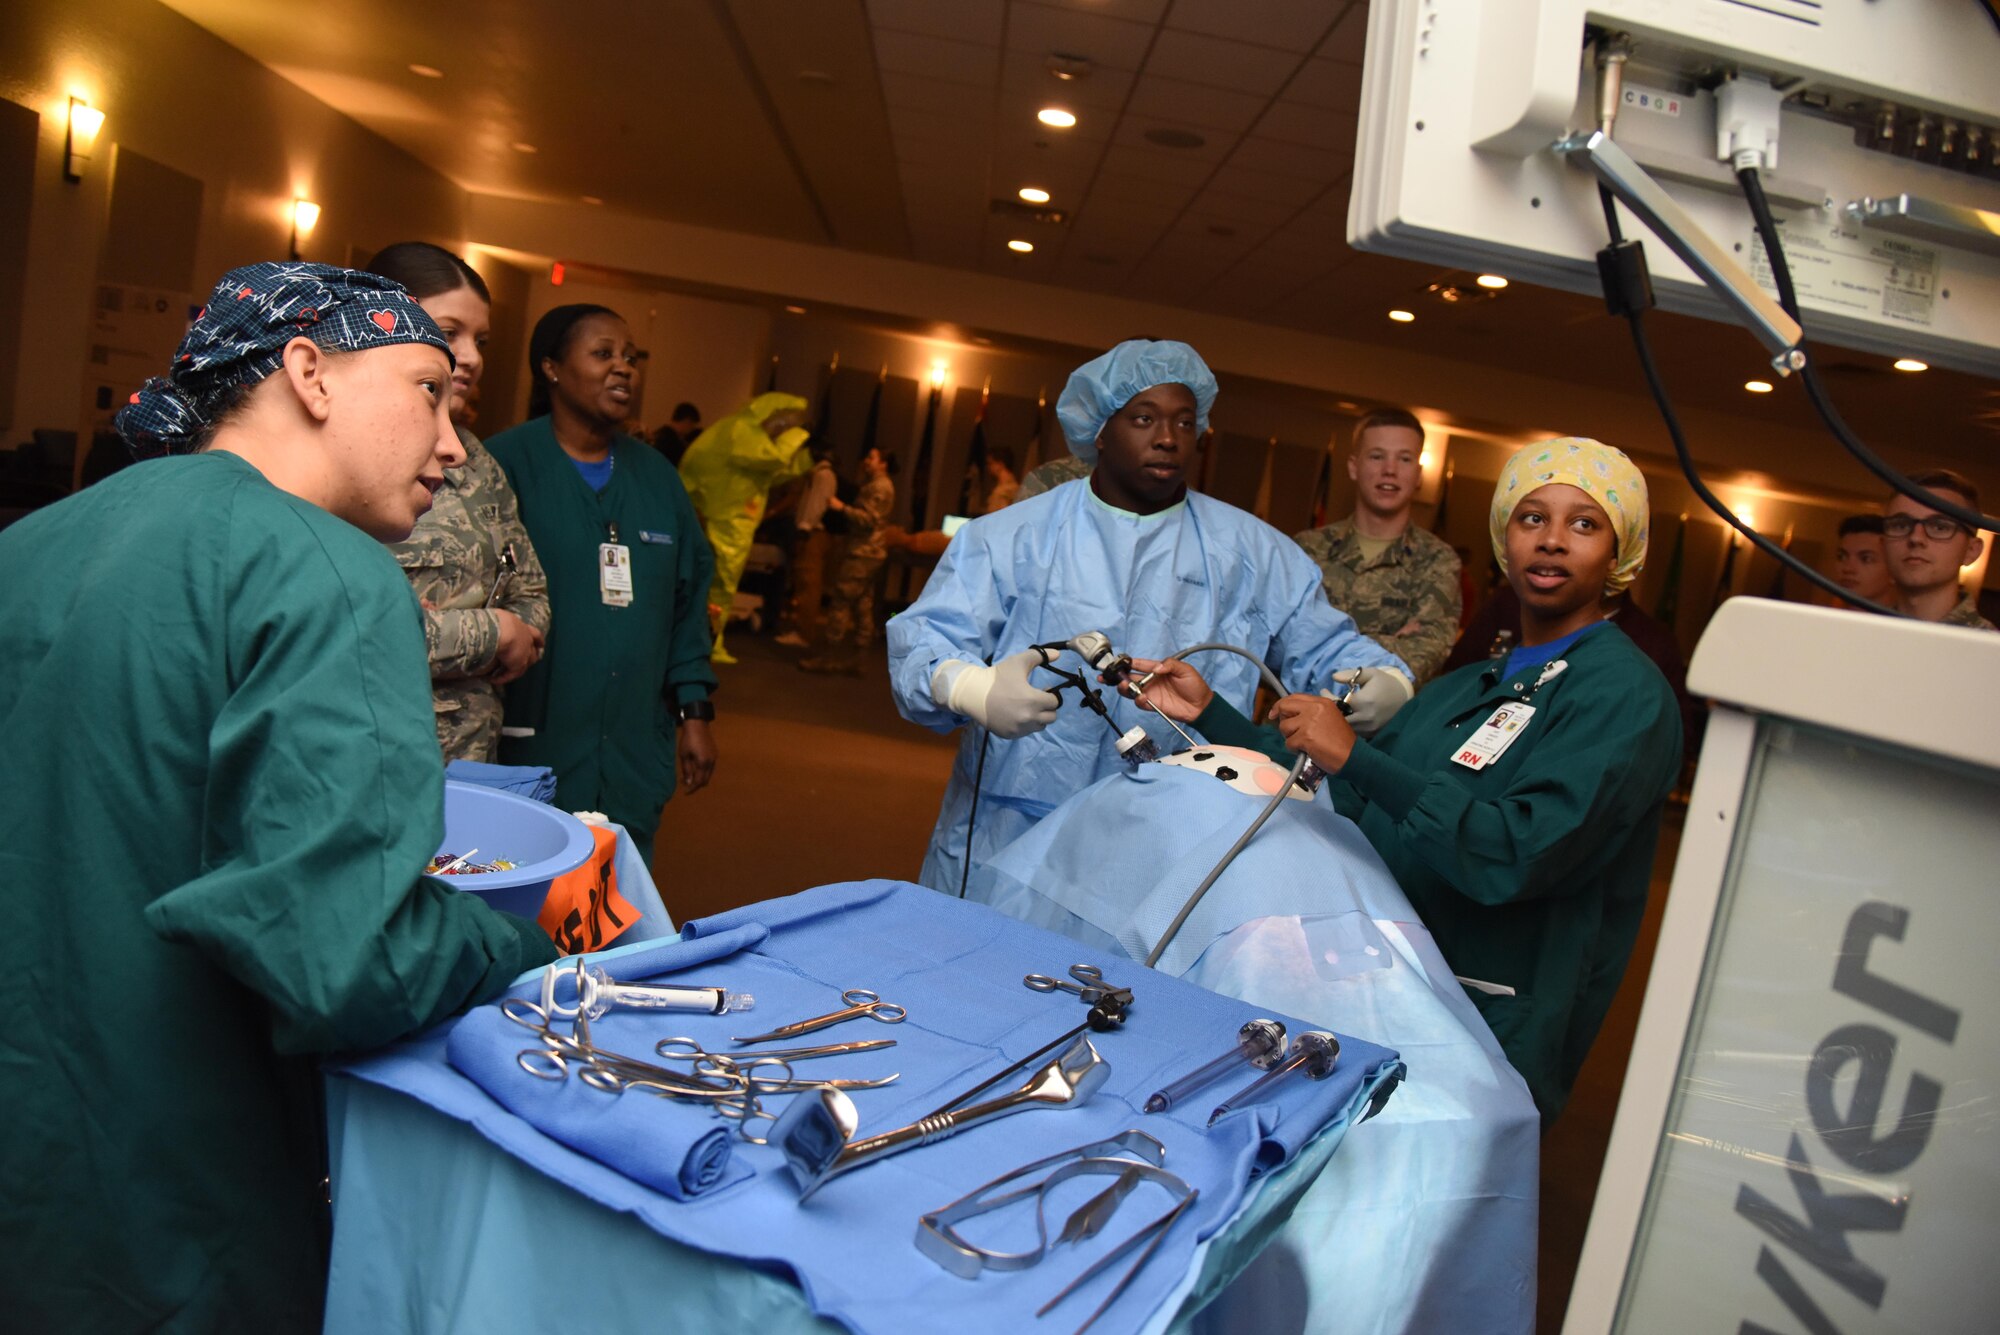 Cadet Laugston Thompson, Mississippi State University Air Force ROTC cadet, simulates a laparoscopic procedure in the Keesler Medical Center Don Wylie Auditorium during Pathways to Blue April 7, 2017, on Keesler Air Force Base, Miss. Pathways to Blue, a diversity and inclusion outreach event hosted by 2nd Air Force with the support of the 81st Training Wing and the 403rd Wing, provided 178 cadets who traveled here from seven detachments a chance to interact with officers from 36 different specialties from across the Air Force. (U.S. Air Force photo by Kemberly Groue)

